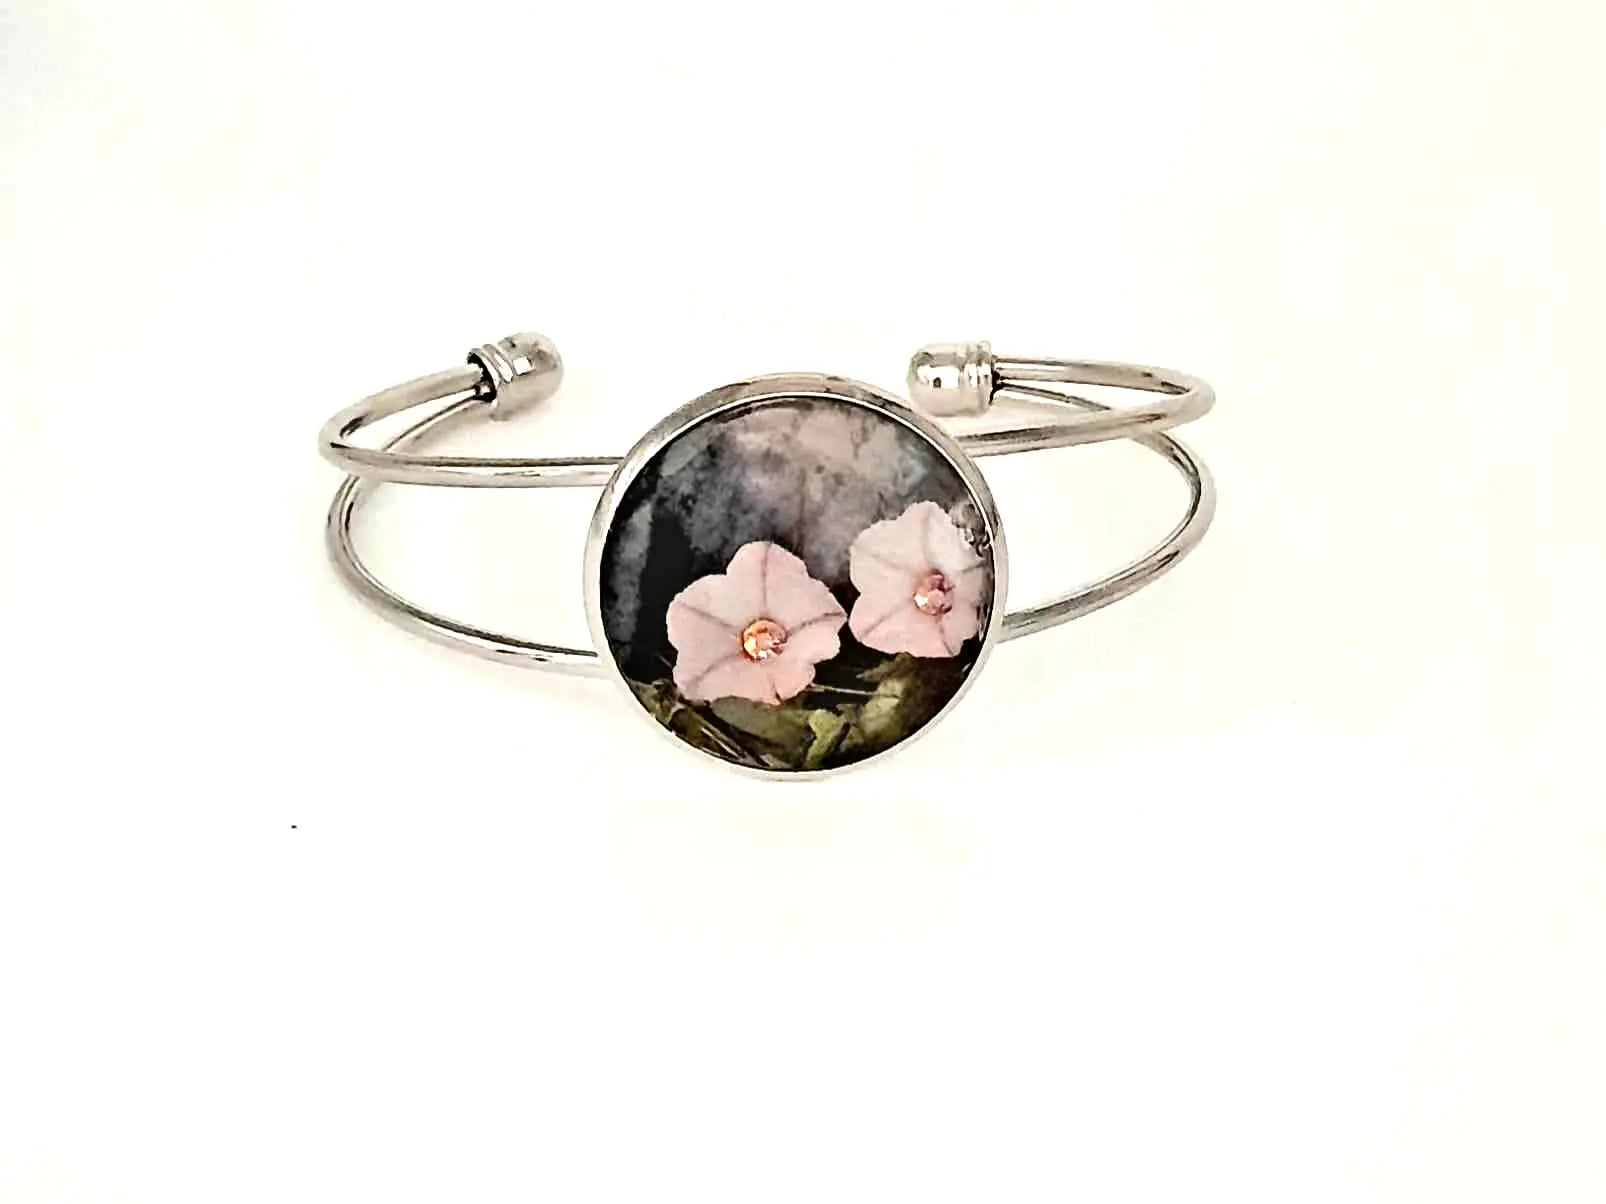 Adjustable shabby chic style silver bracelet handcrafted by Josie - Image #1